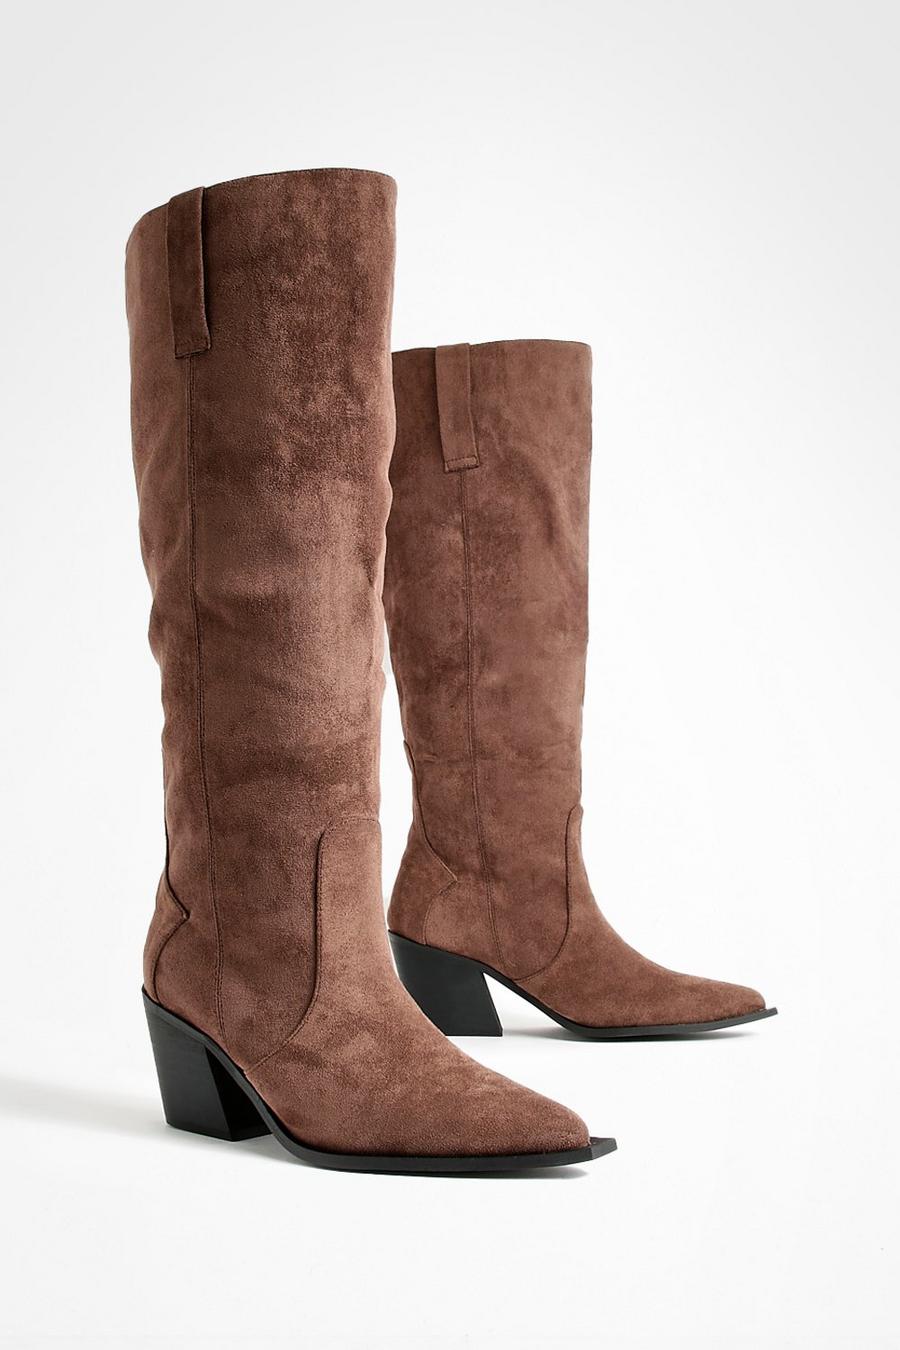 Chocolate Wide Fit Western Cowboy Knee High Boots 